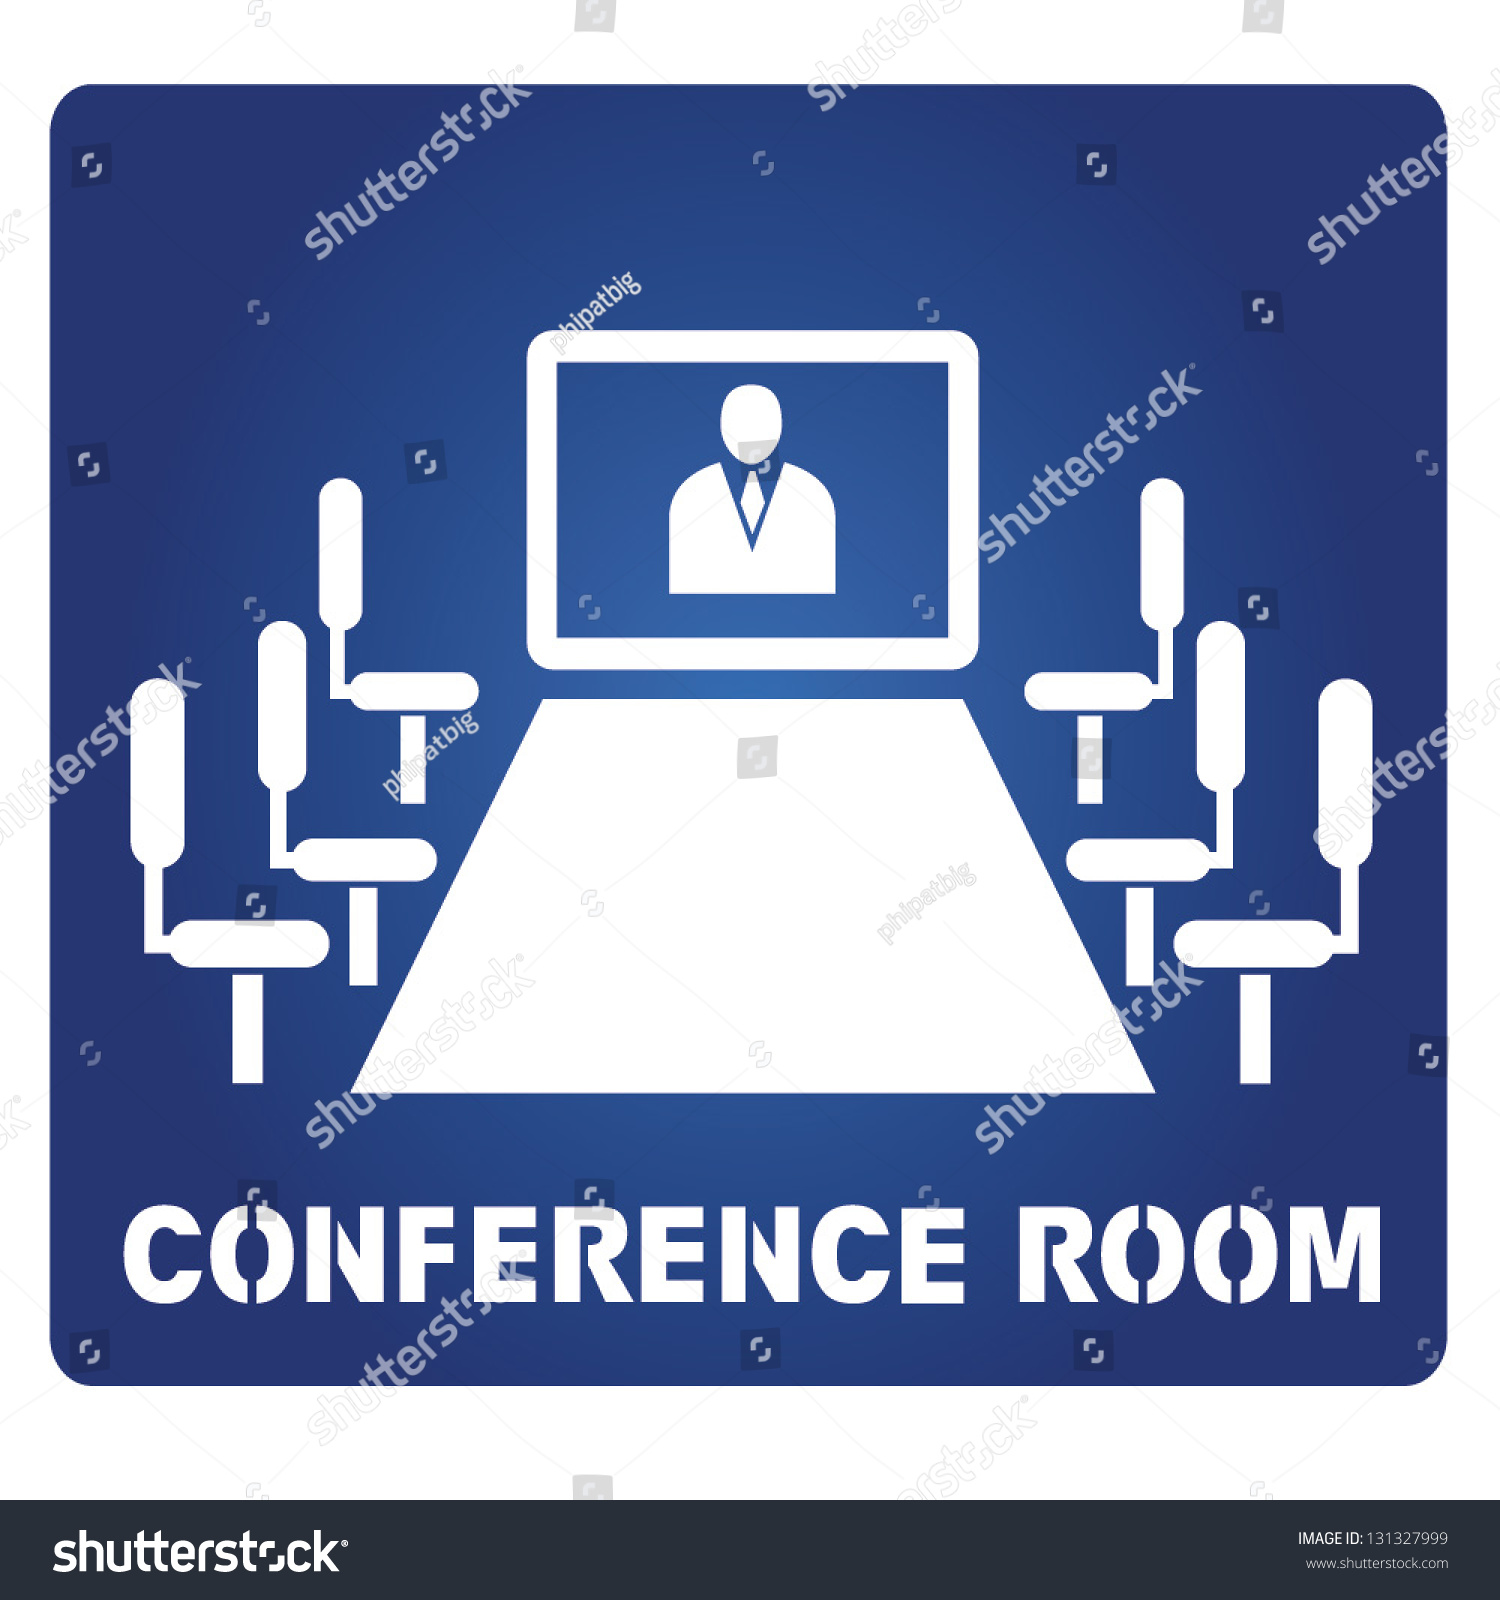 conference room clipart - photo #30